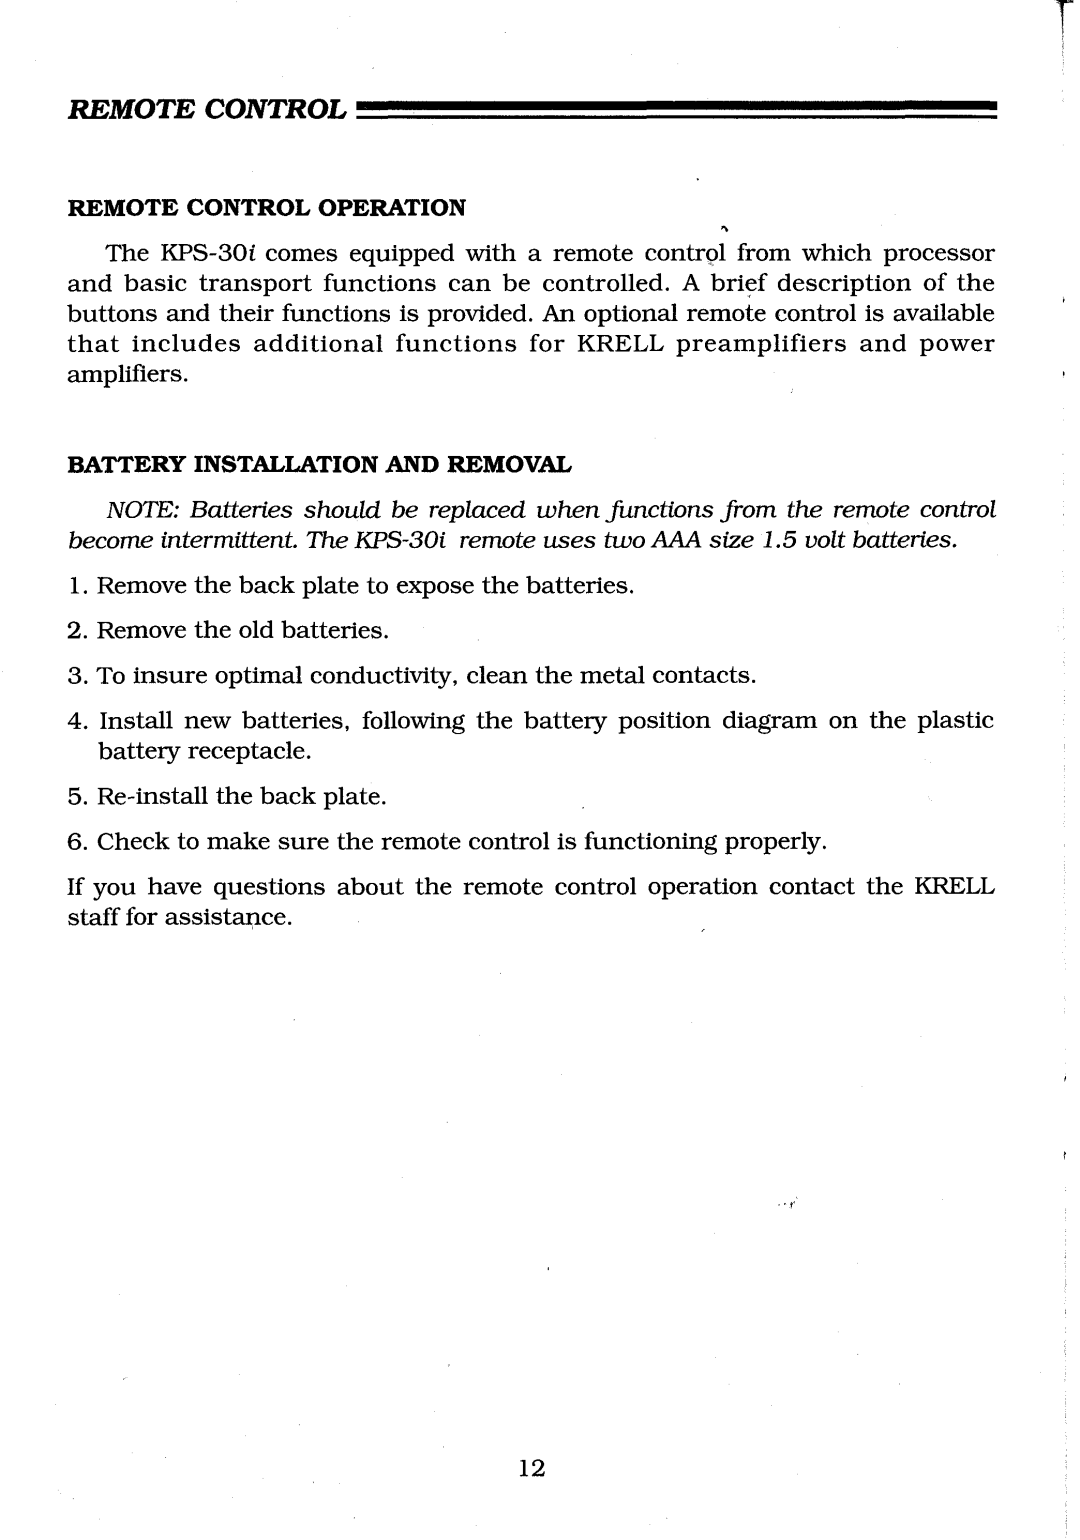 Krell Industries KPS-30i manual Battery Installation, And Removal, Remote Control Operation 